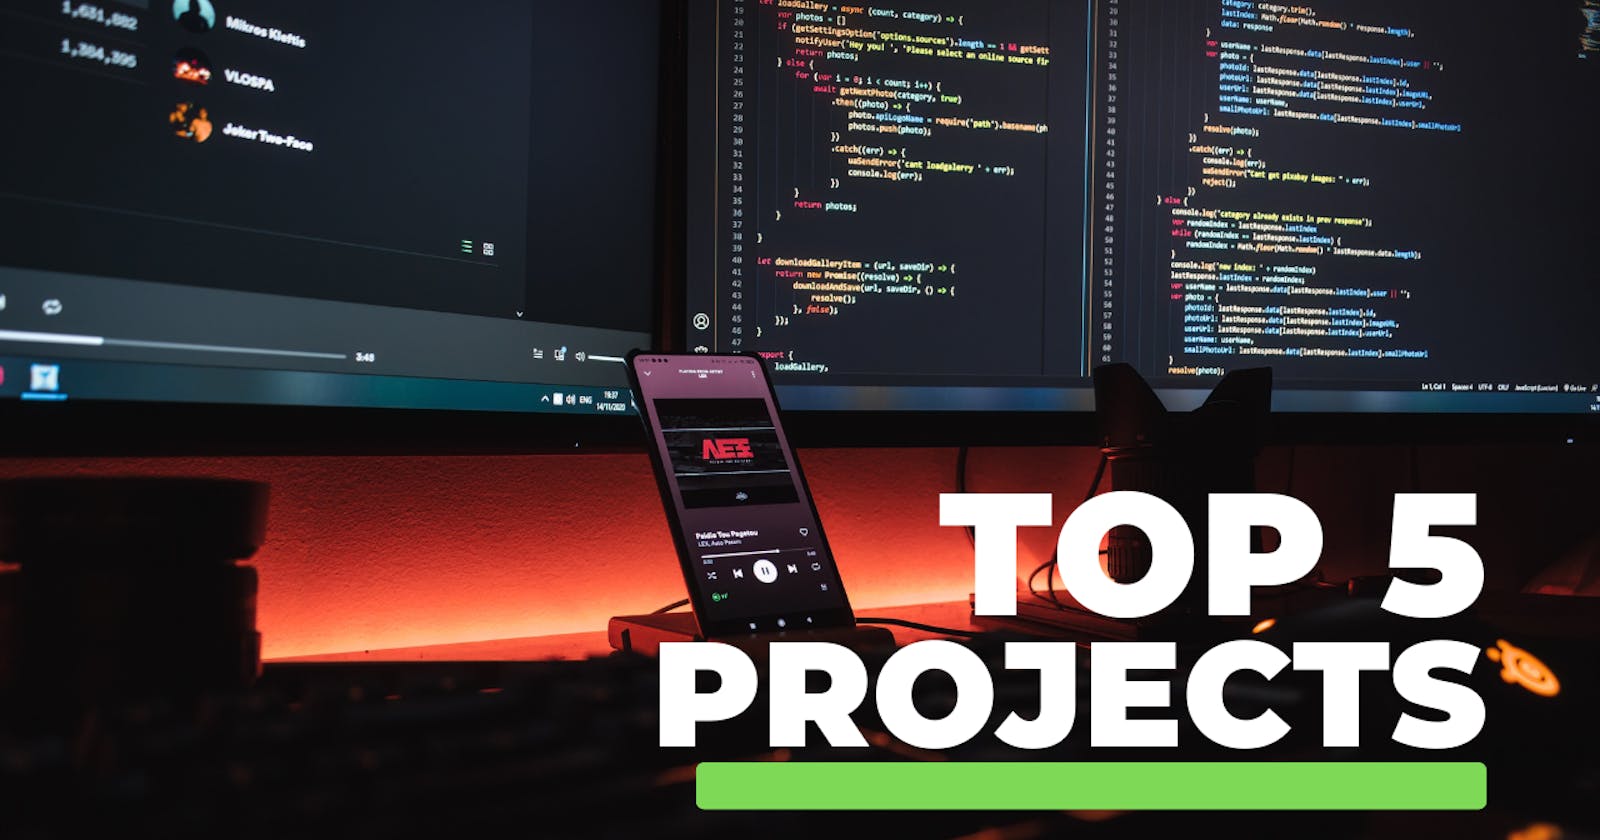 Top 5 Projects